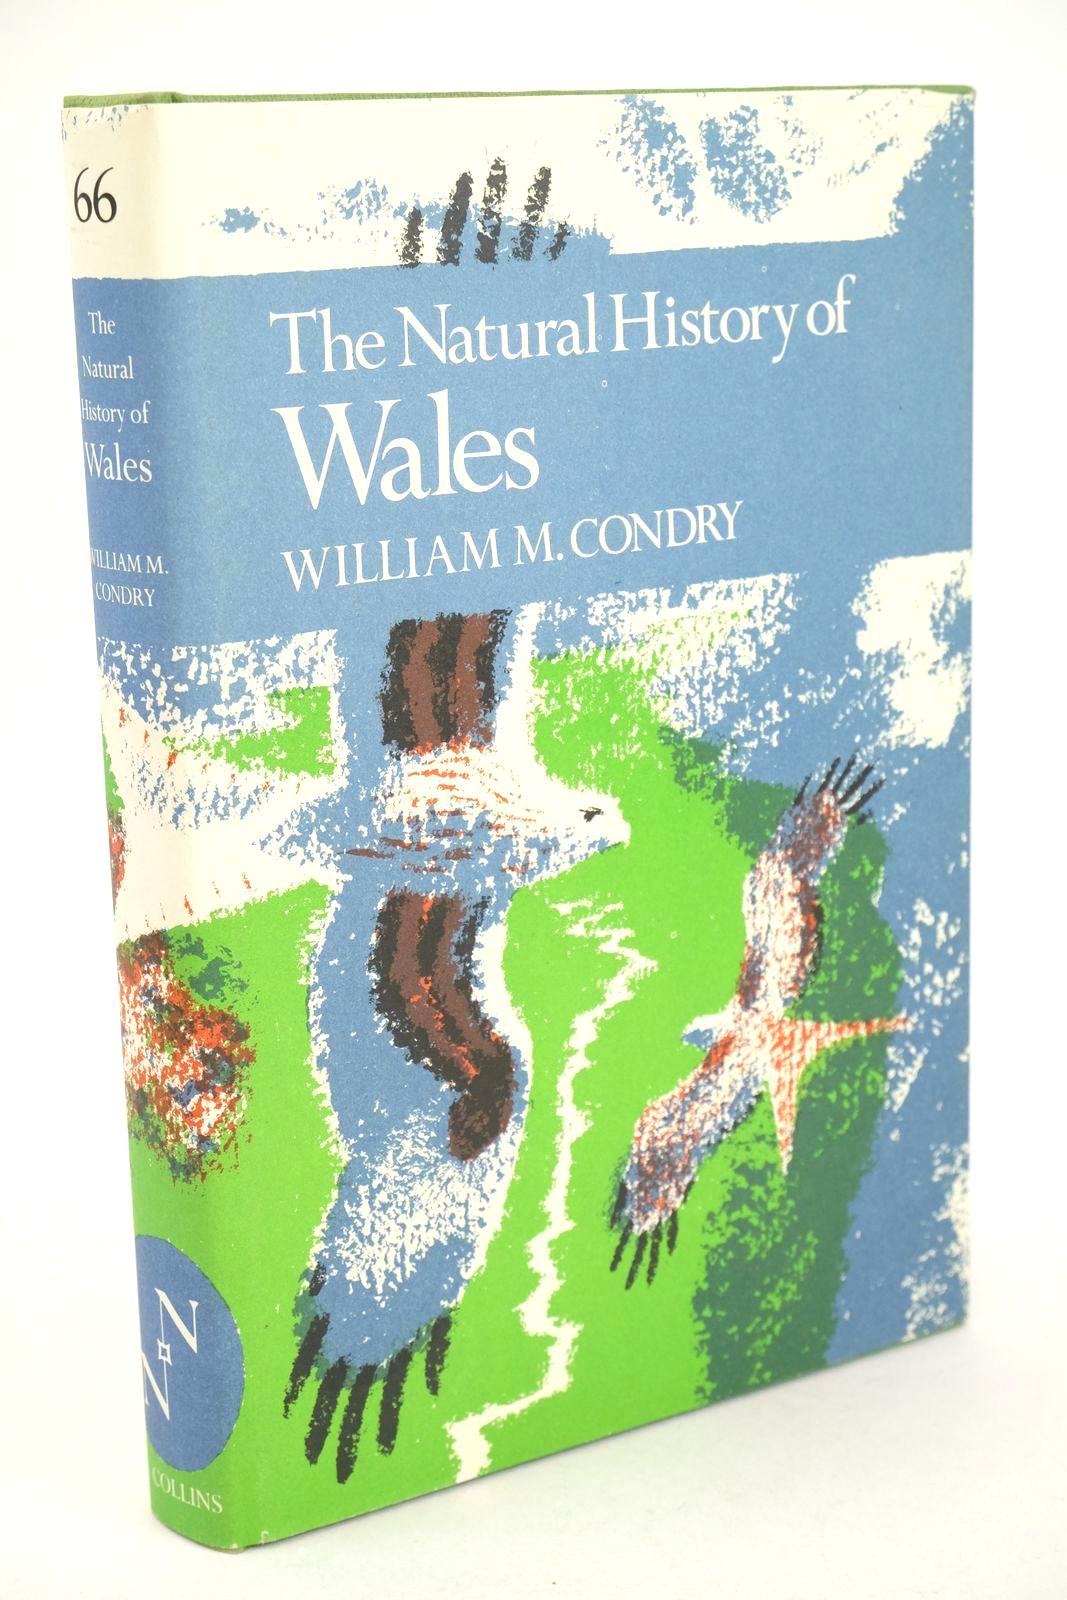 Photo of THE NATURAL HISTORY OF WALES (NN 66) written by Condry, William M. published by Collins (STOCK CODE: 1325577)  for sale by Stella & Rose's Books